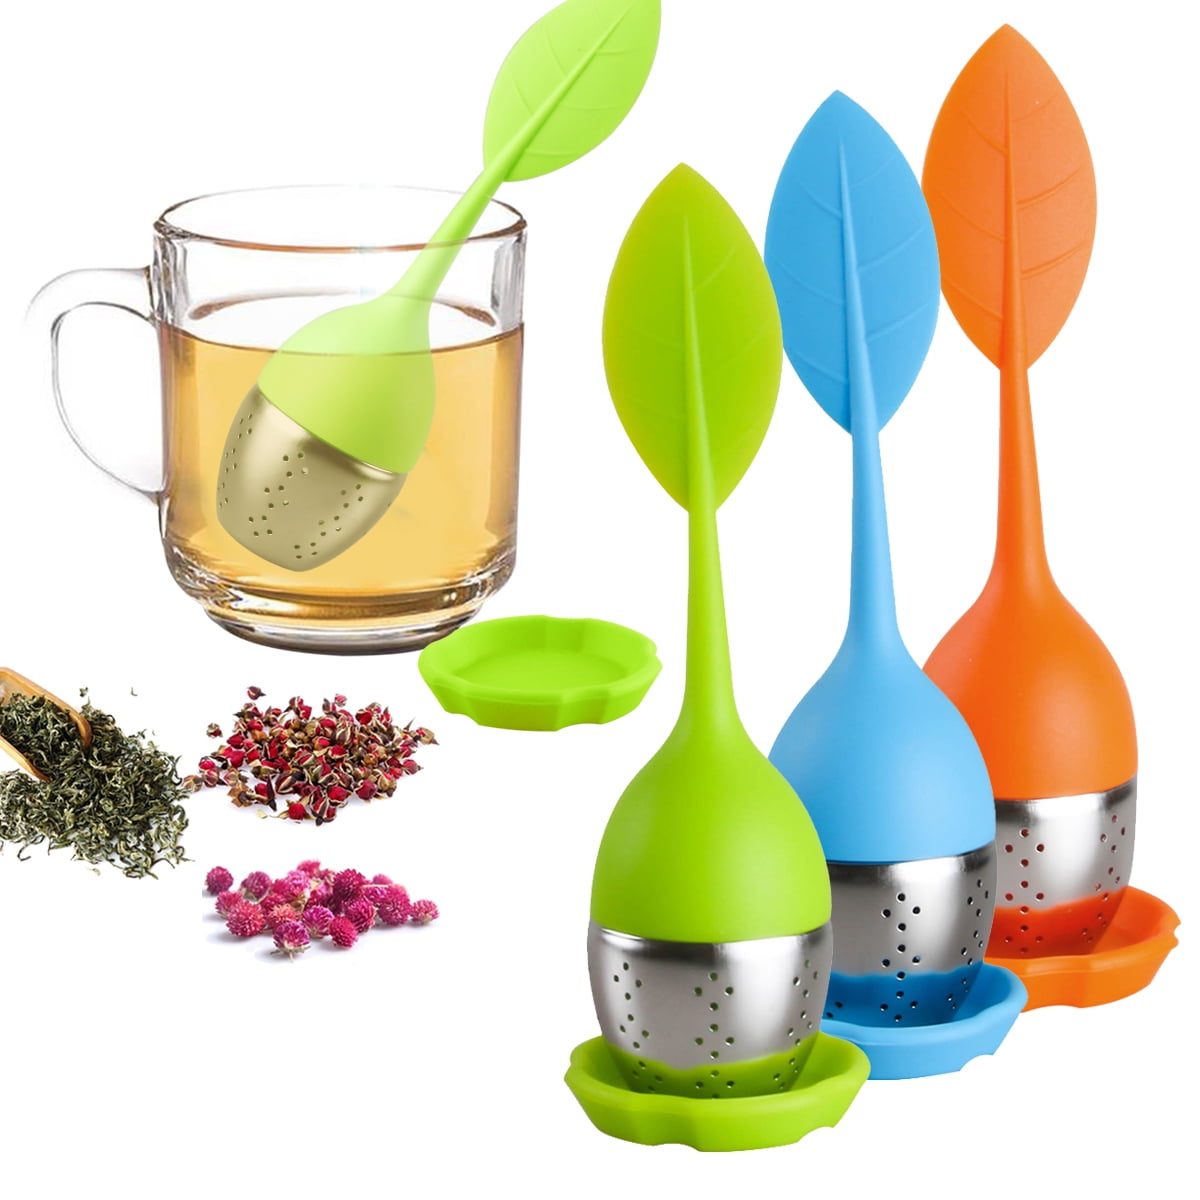 Cat Tea Strainer Infuser Filter Silicone Leaf Spice Herbal Loose Diffuser QK 